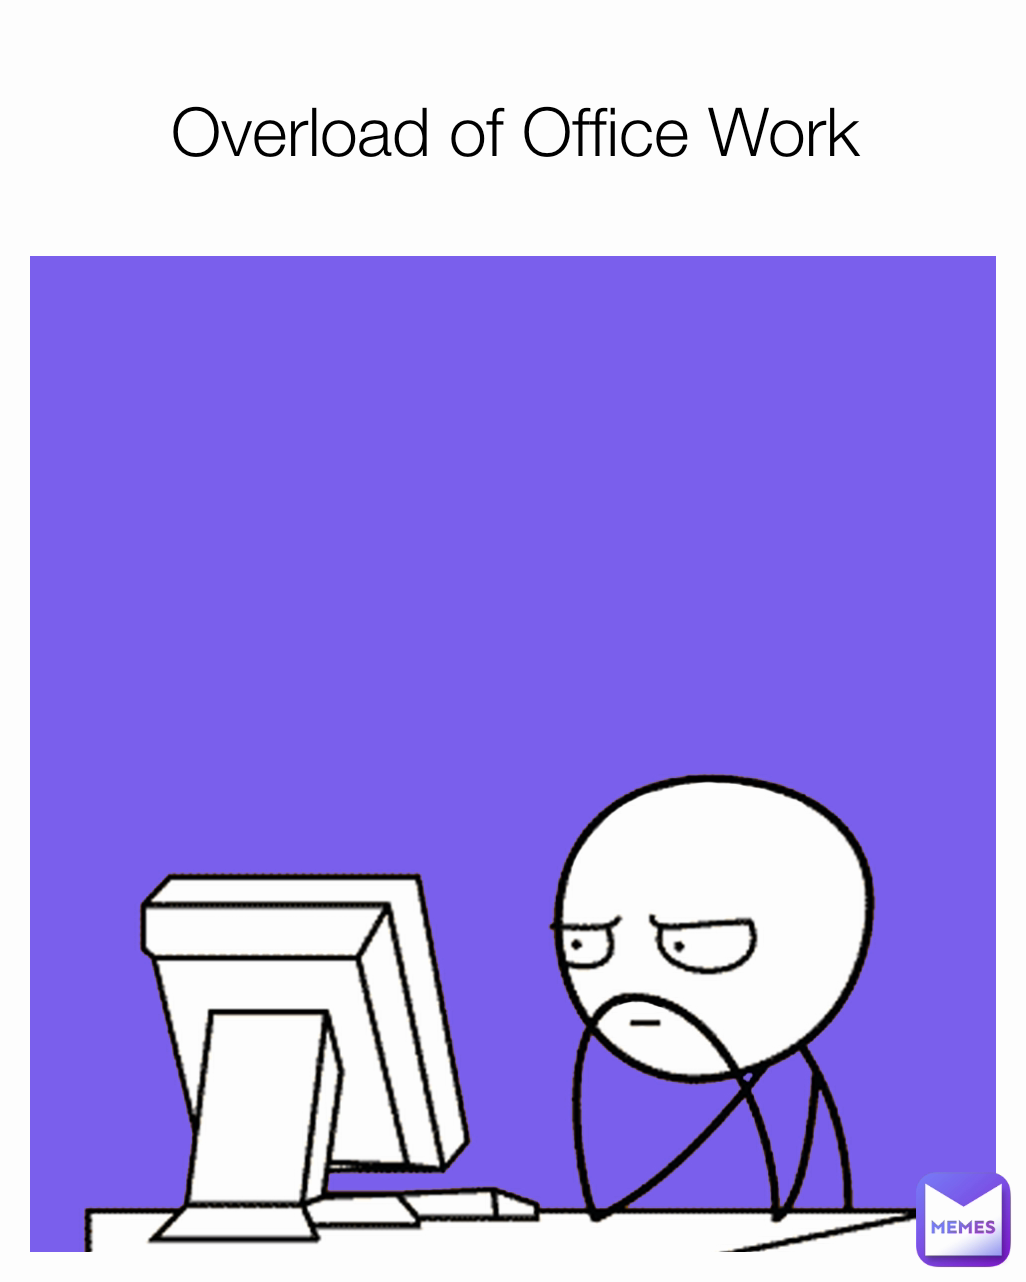 Overload of Office Work